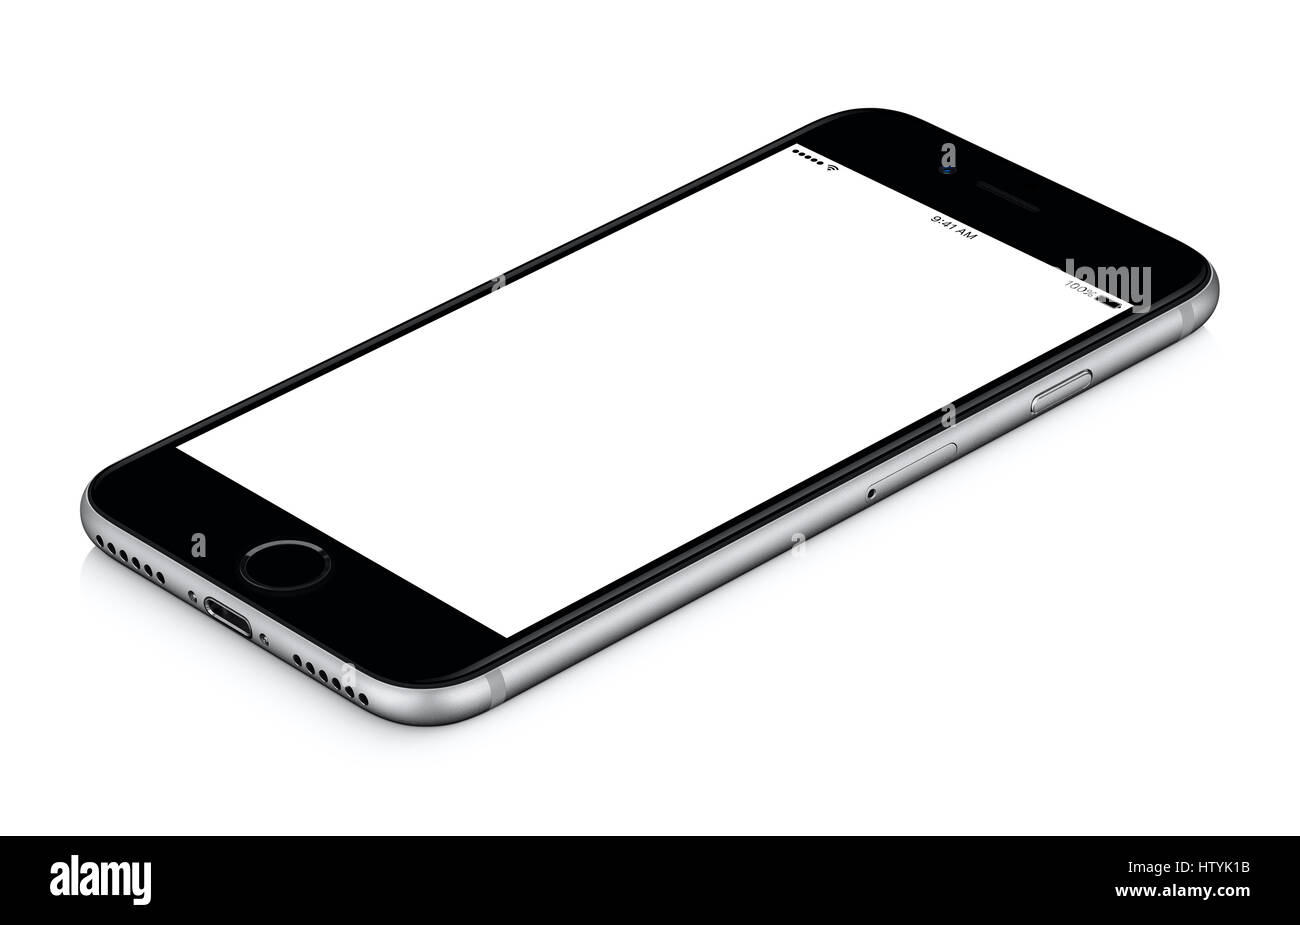 Black mobile smart phone mockup clockwise rotated lies on the surface with blank screen isolated on white background. Stock Photo